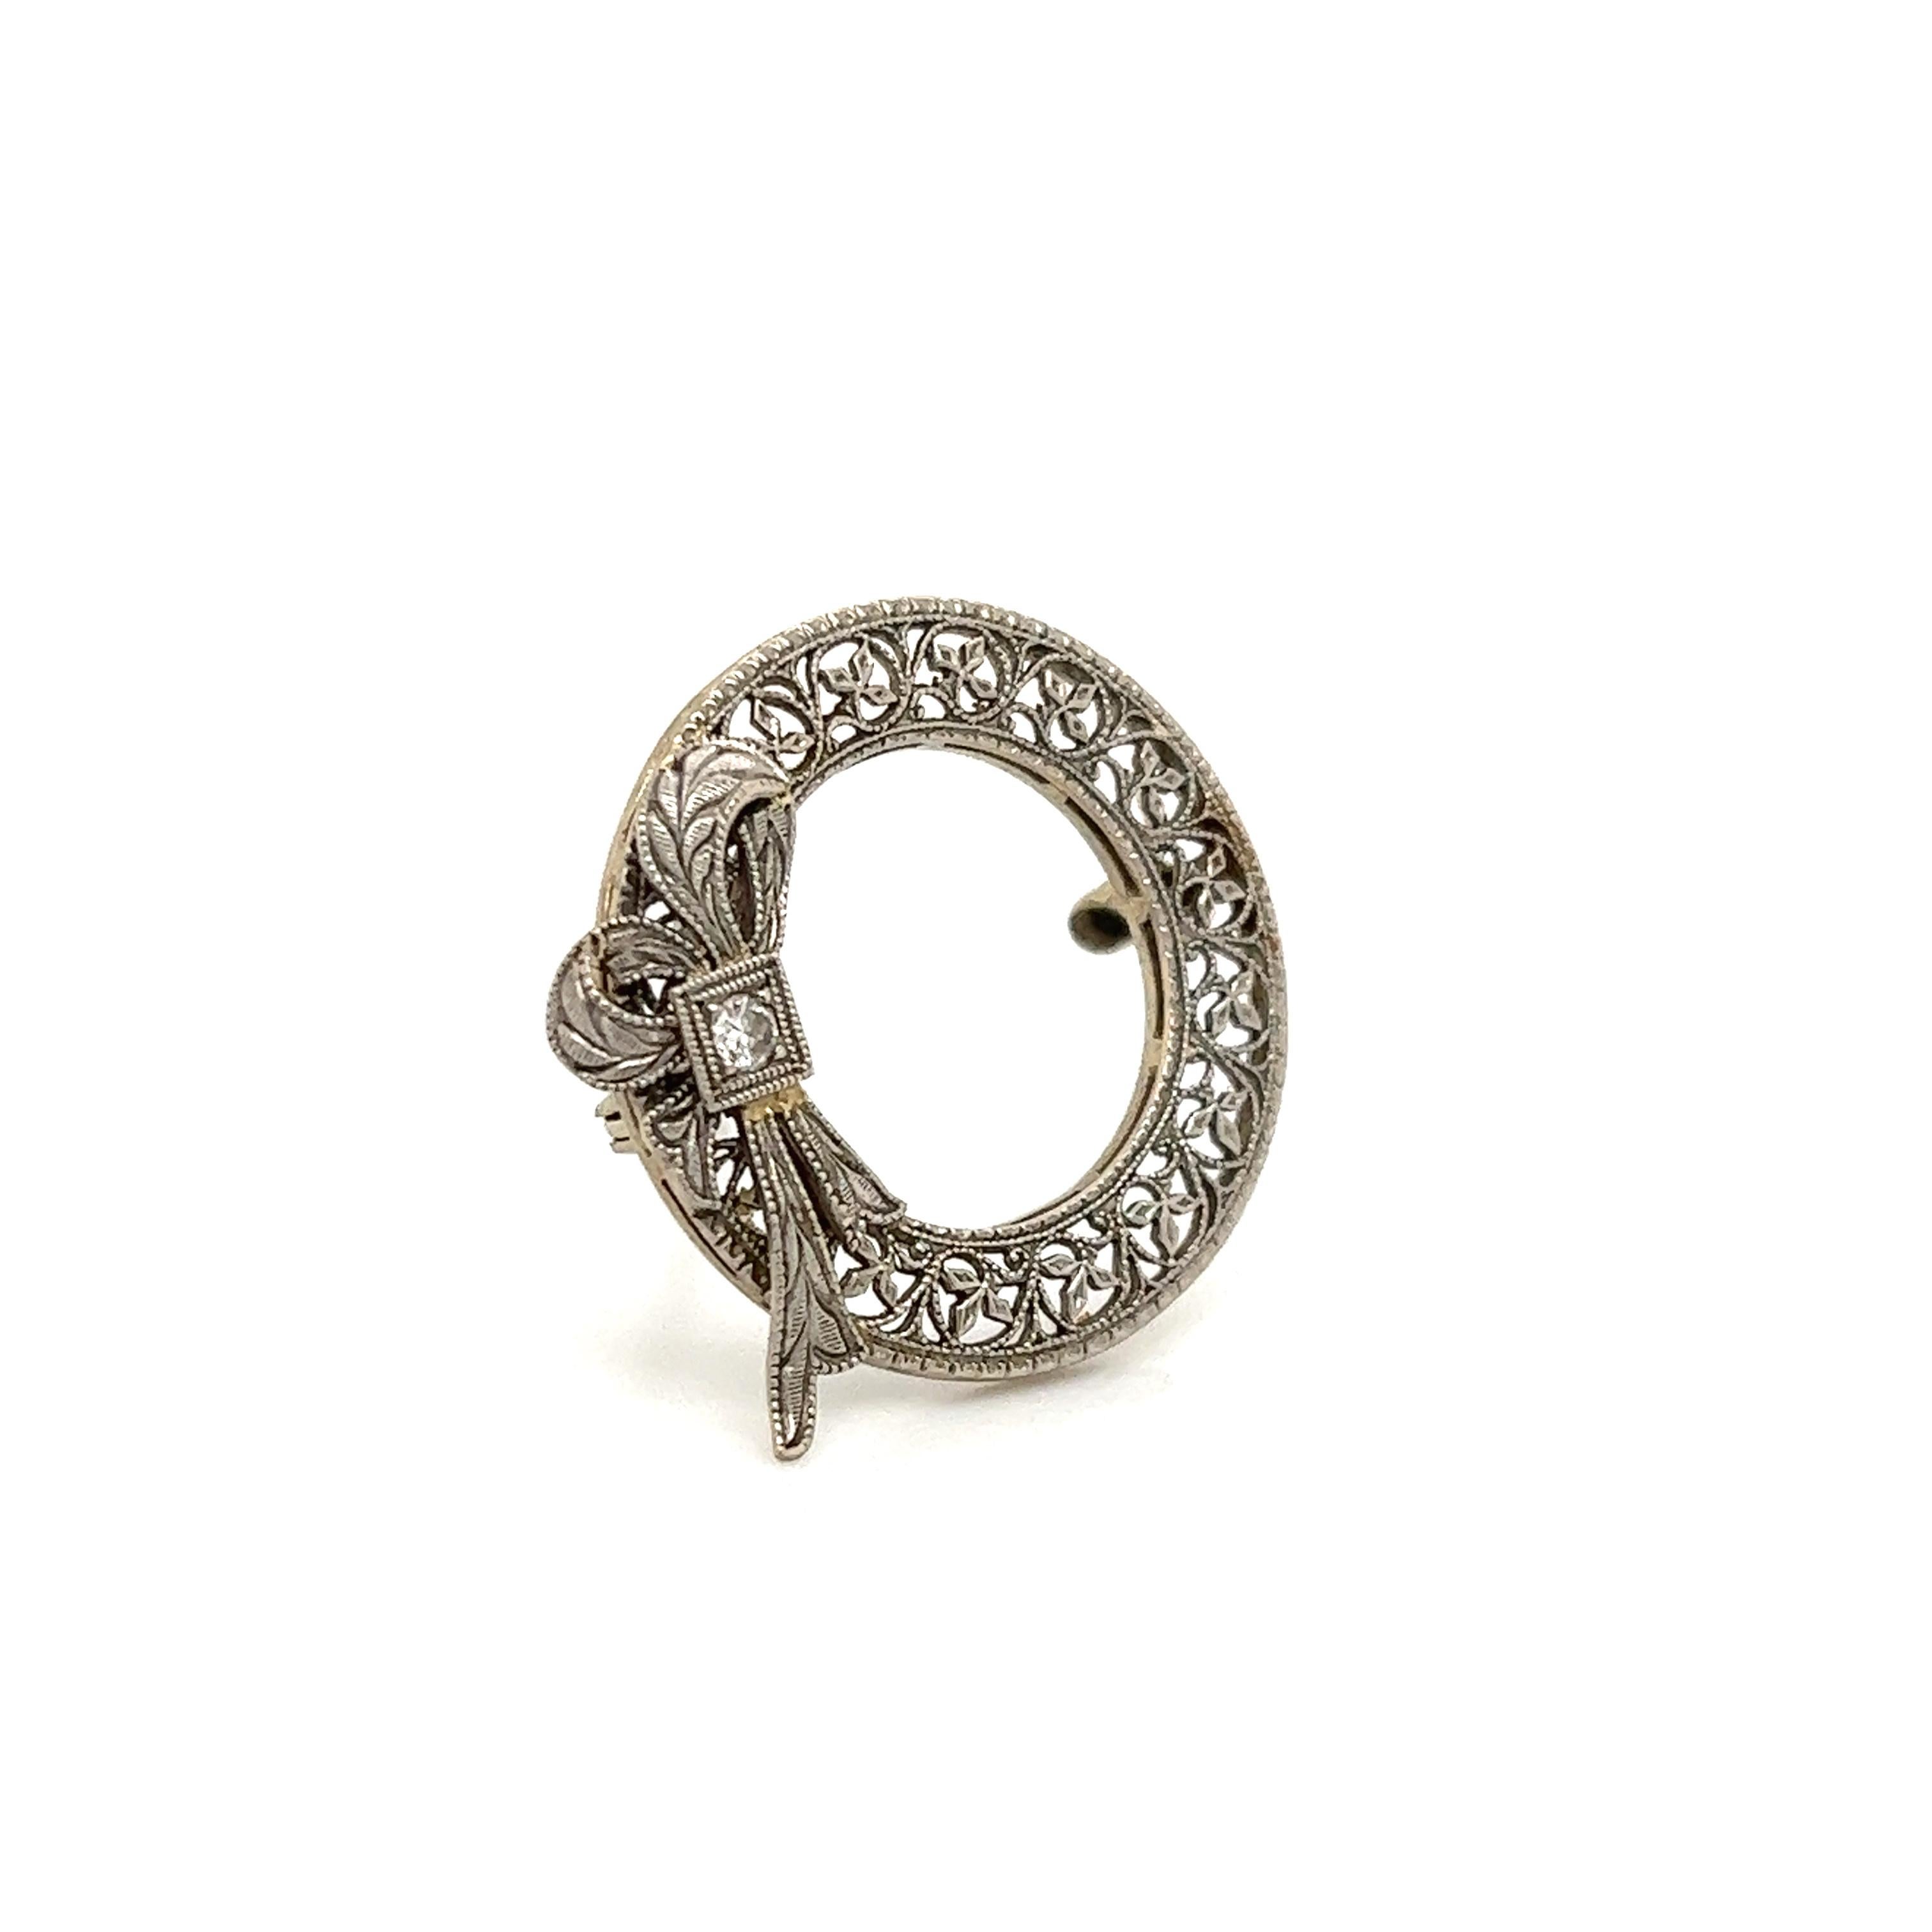 Elegant design seen on this brooch. The brooch is crafted in 14k white gold and is themed after the Belle Epoque era of jewelry. Whimsical filigree is crafted into the border of the brooch. The pin features an open work circular design and shows a